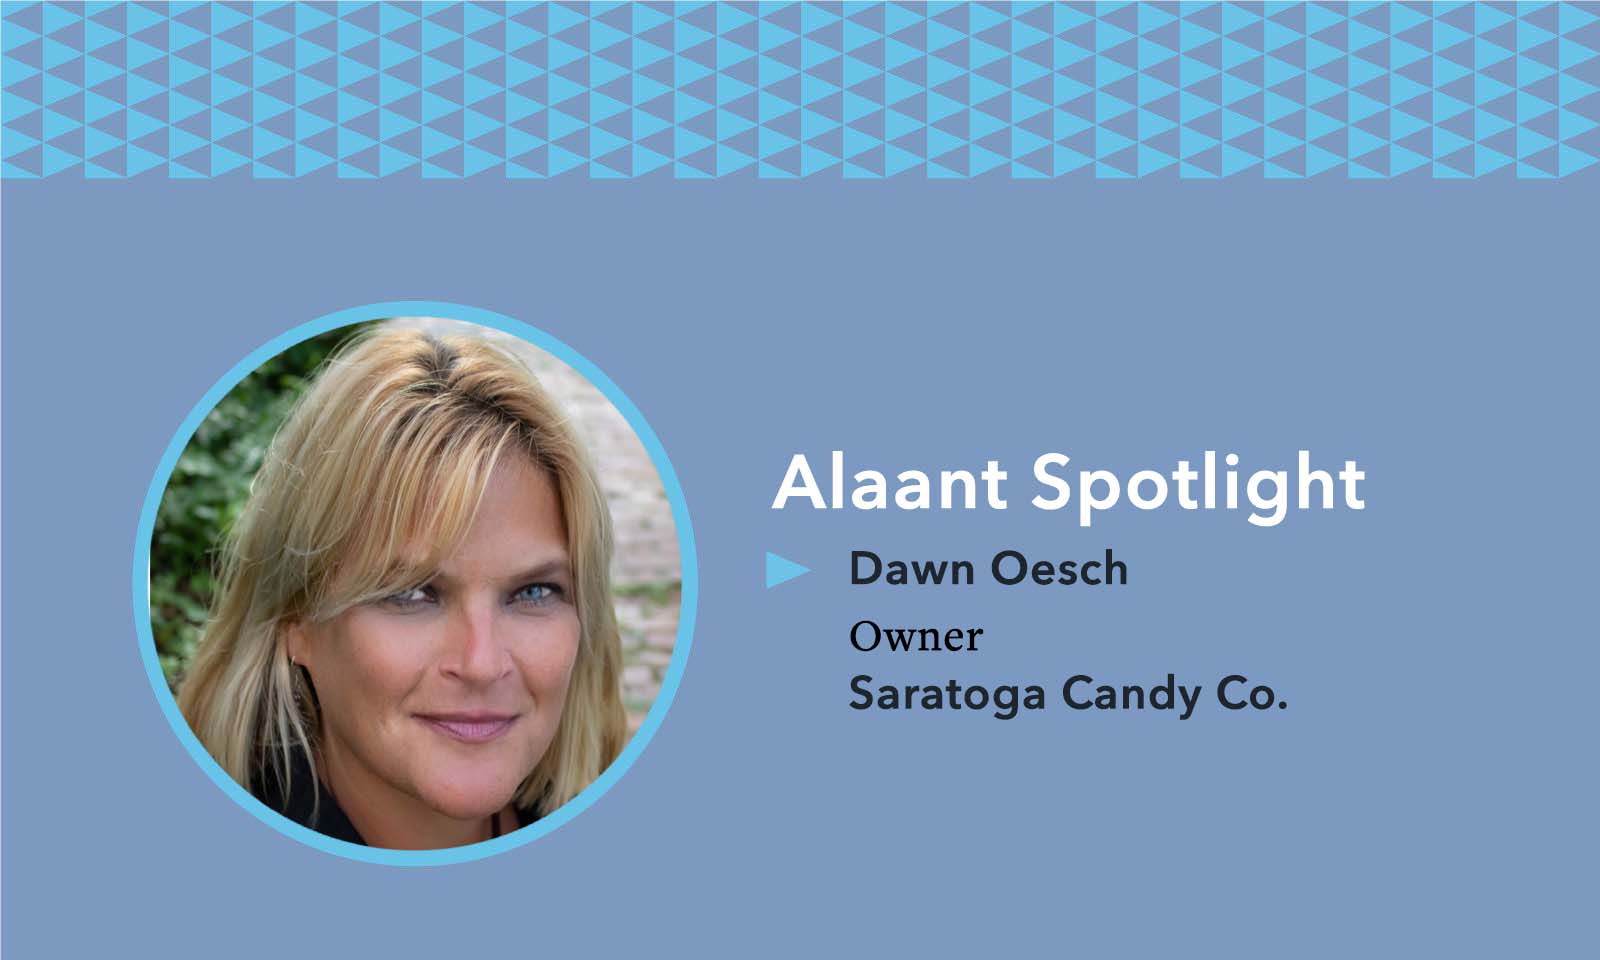 Alaant Spotlight: Dawn Oesch, Owner of Saratoga Candy Co.